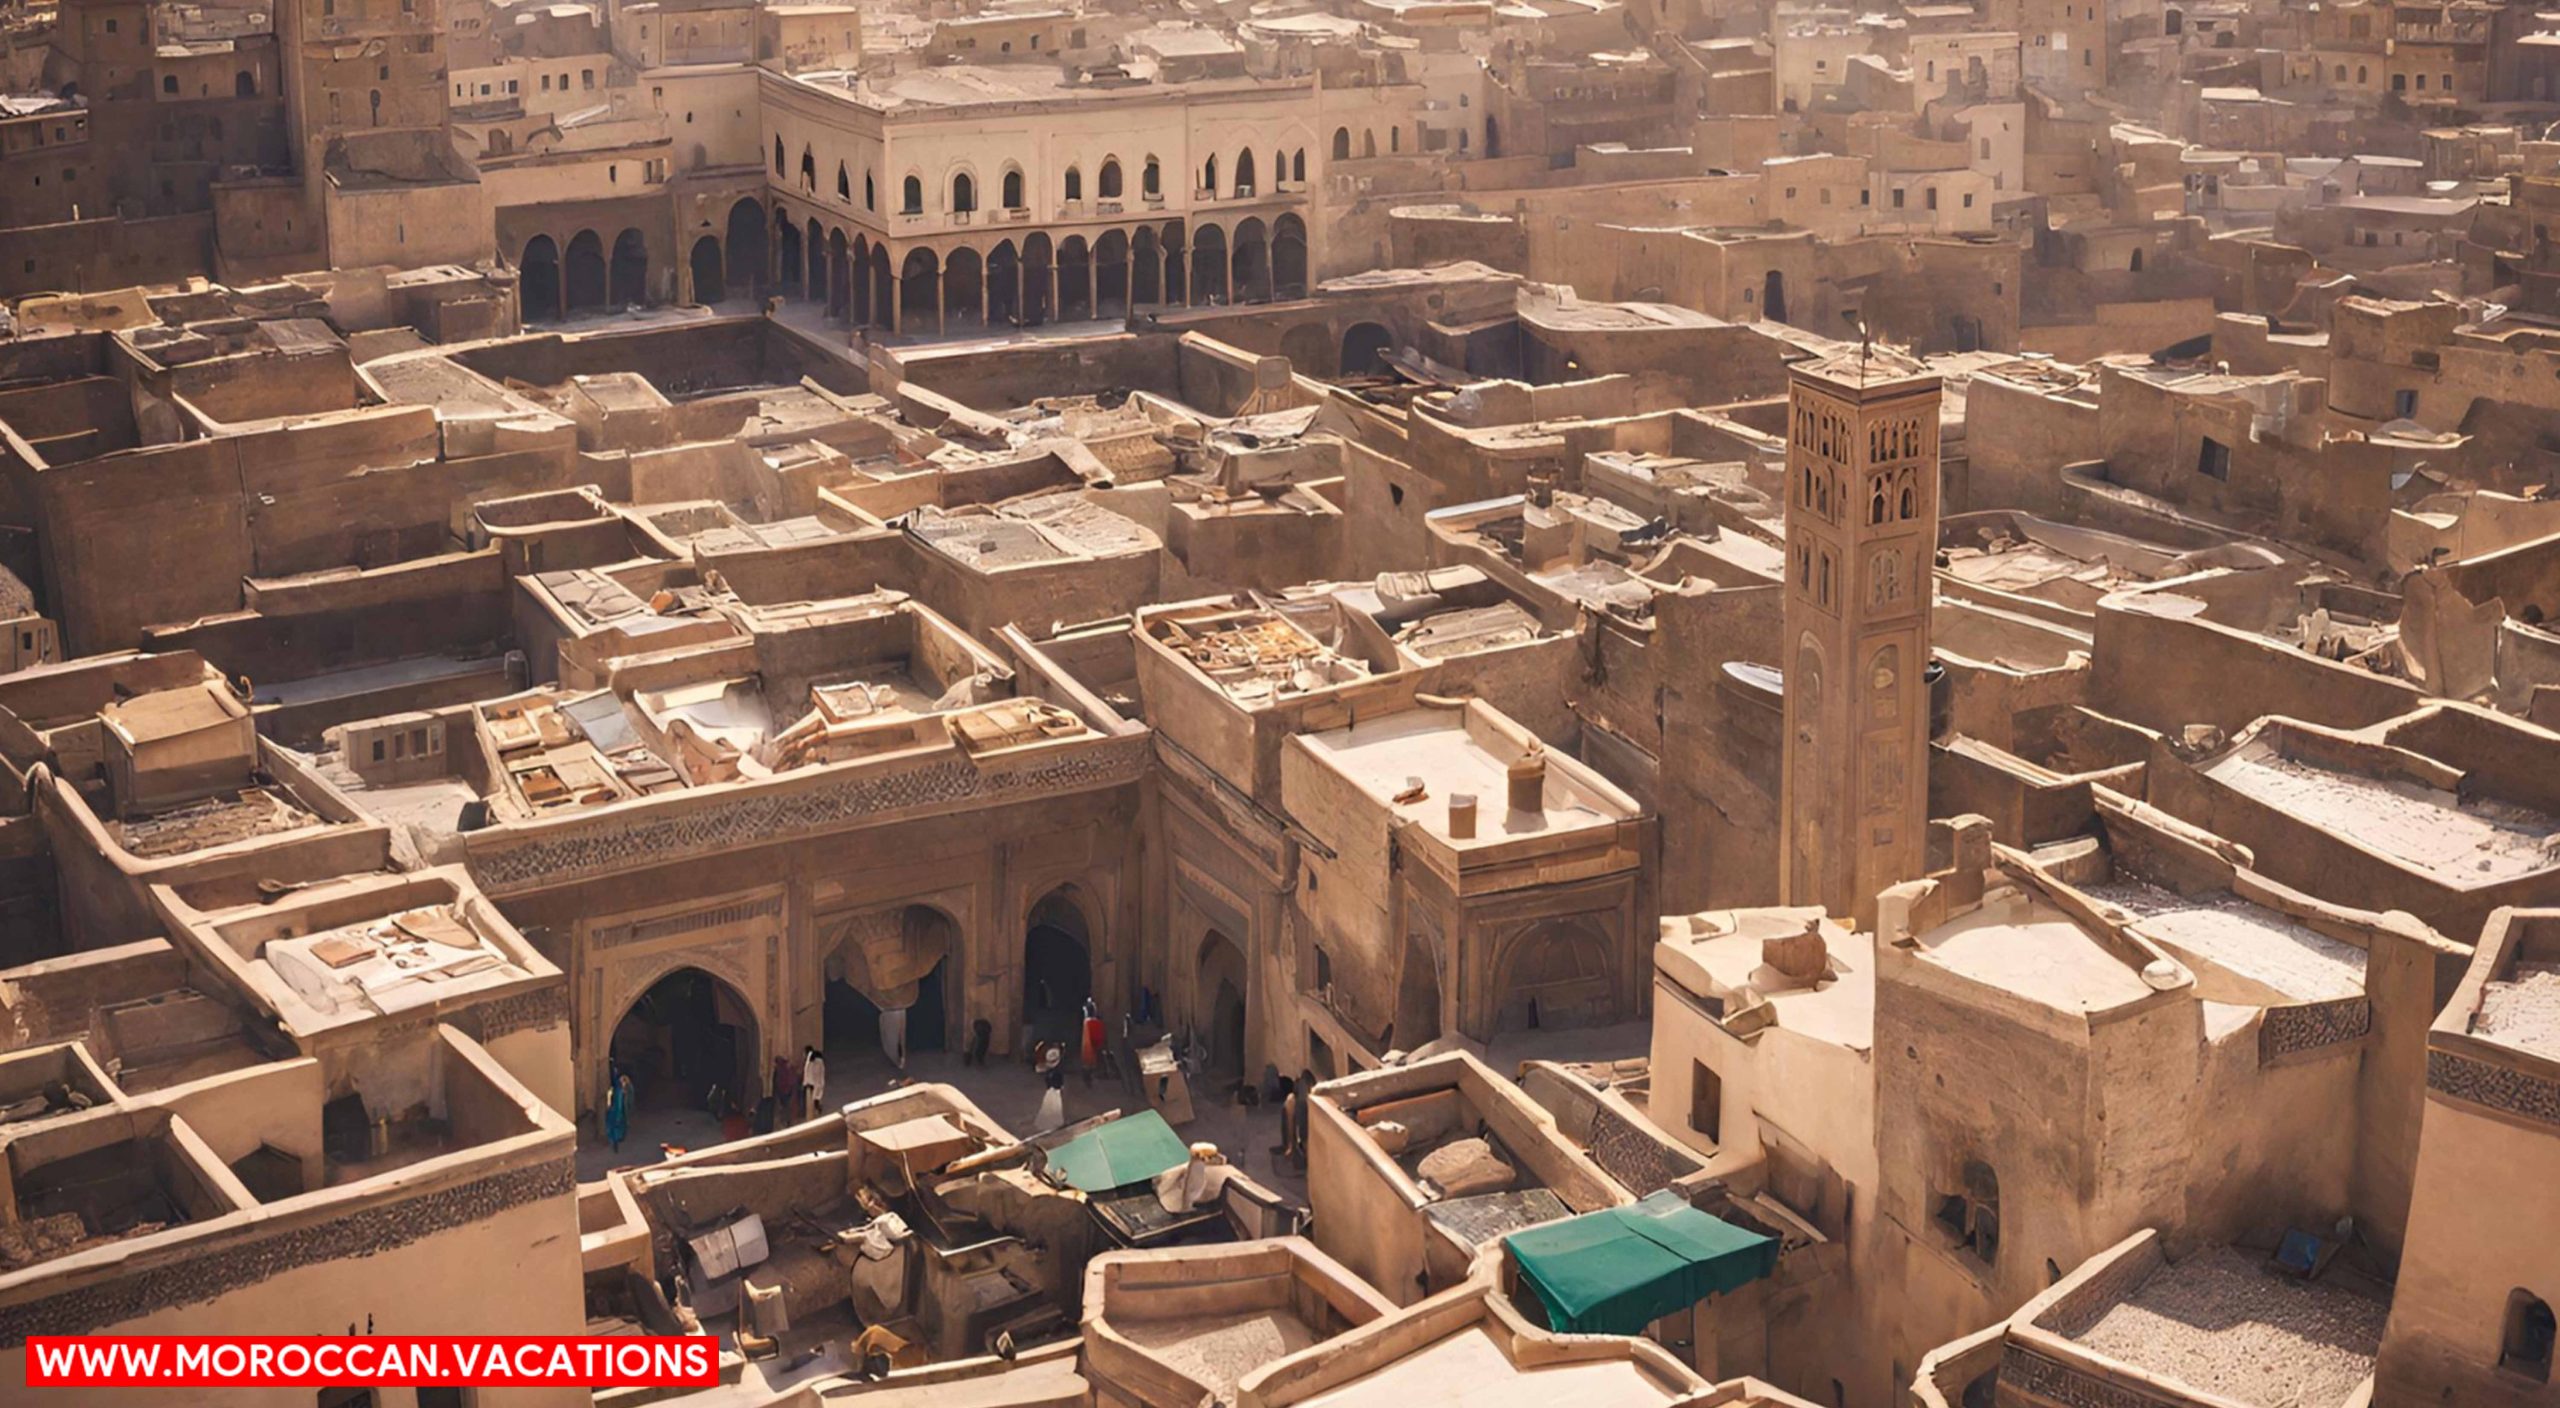 An intricate aerial view of Fez Medina, highlighting winding alleys, bustling marketplaces.